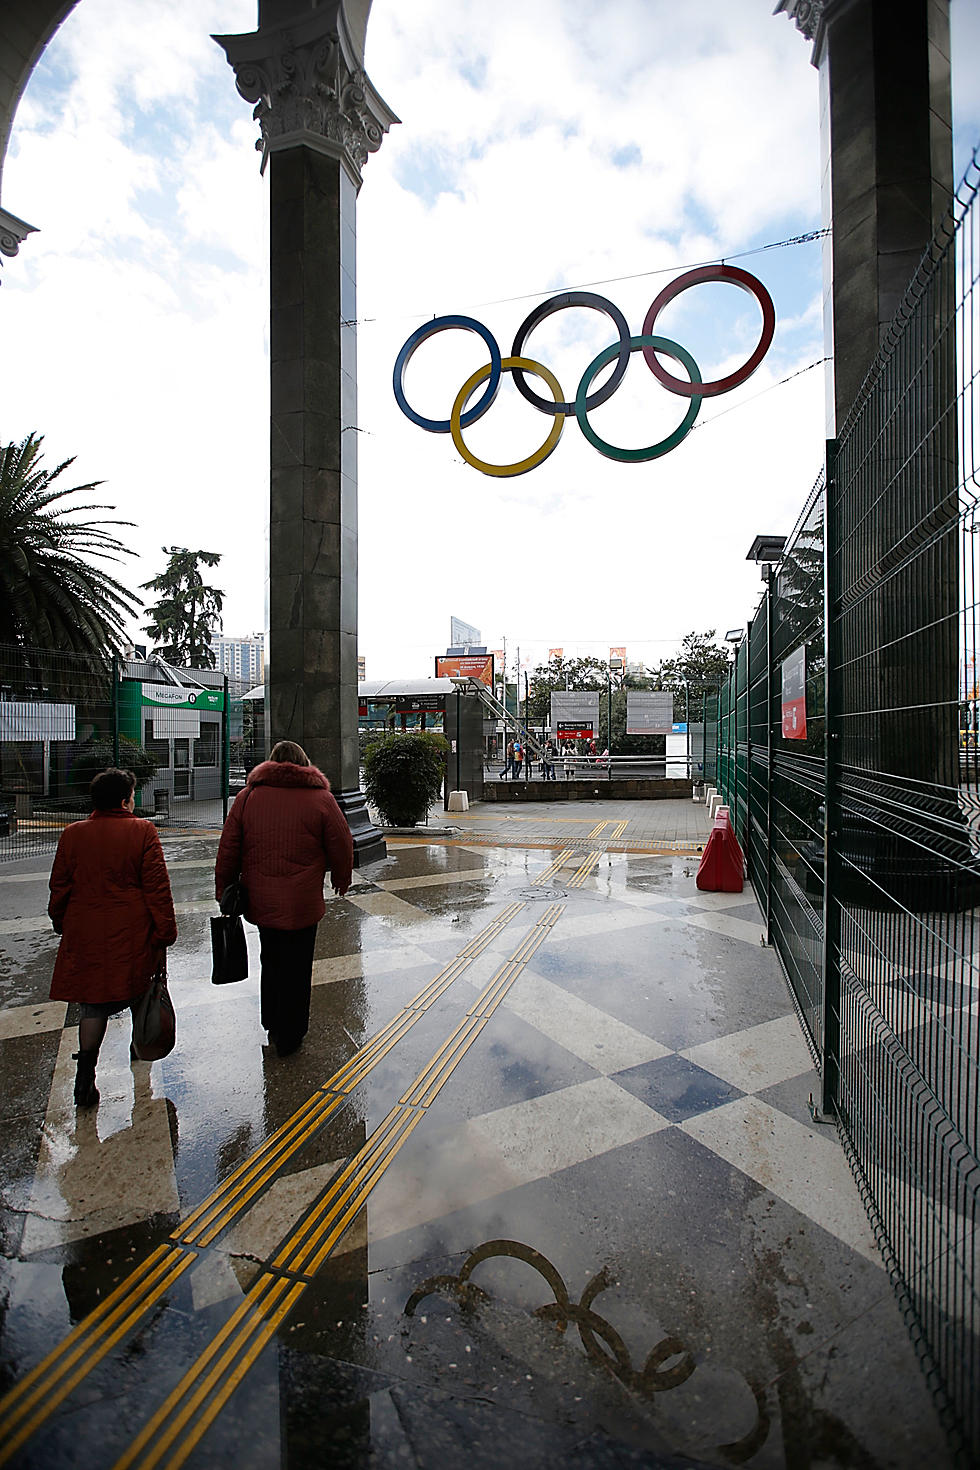 Winter Olympics: A Cab Driver’s View of Sochi